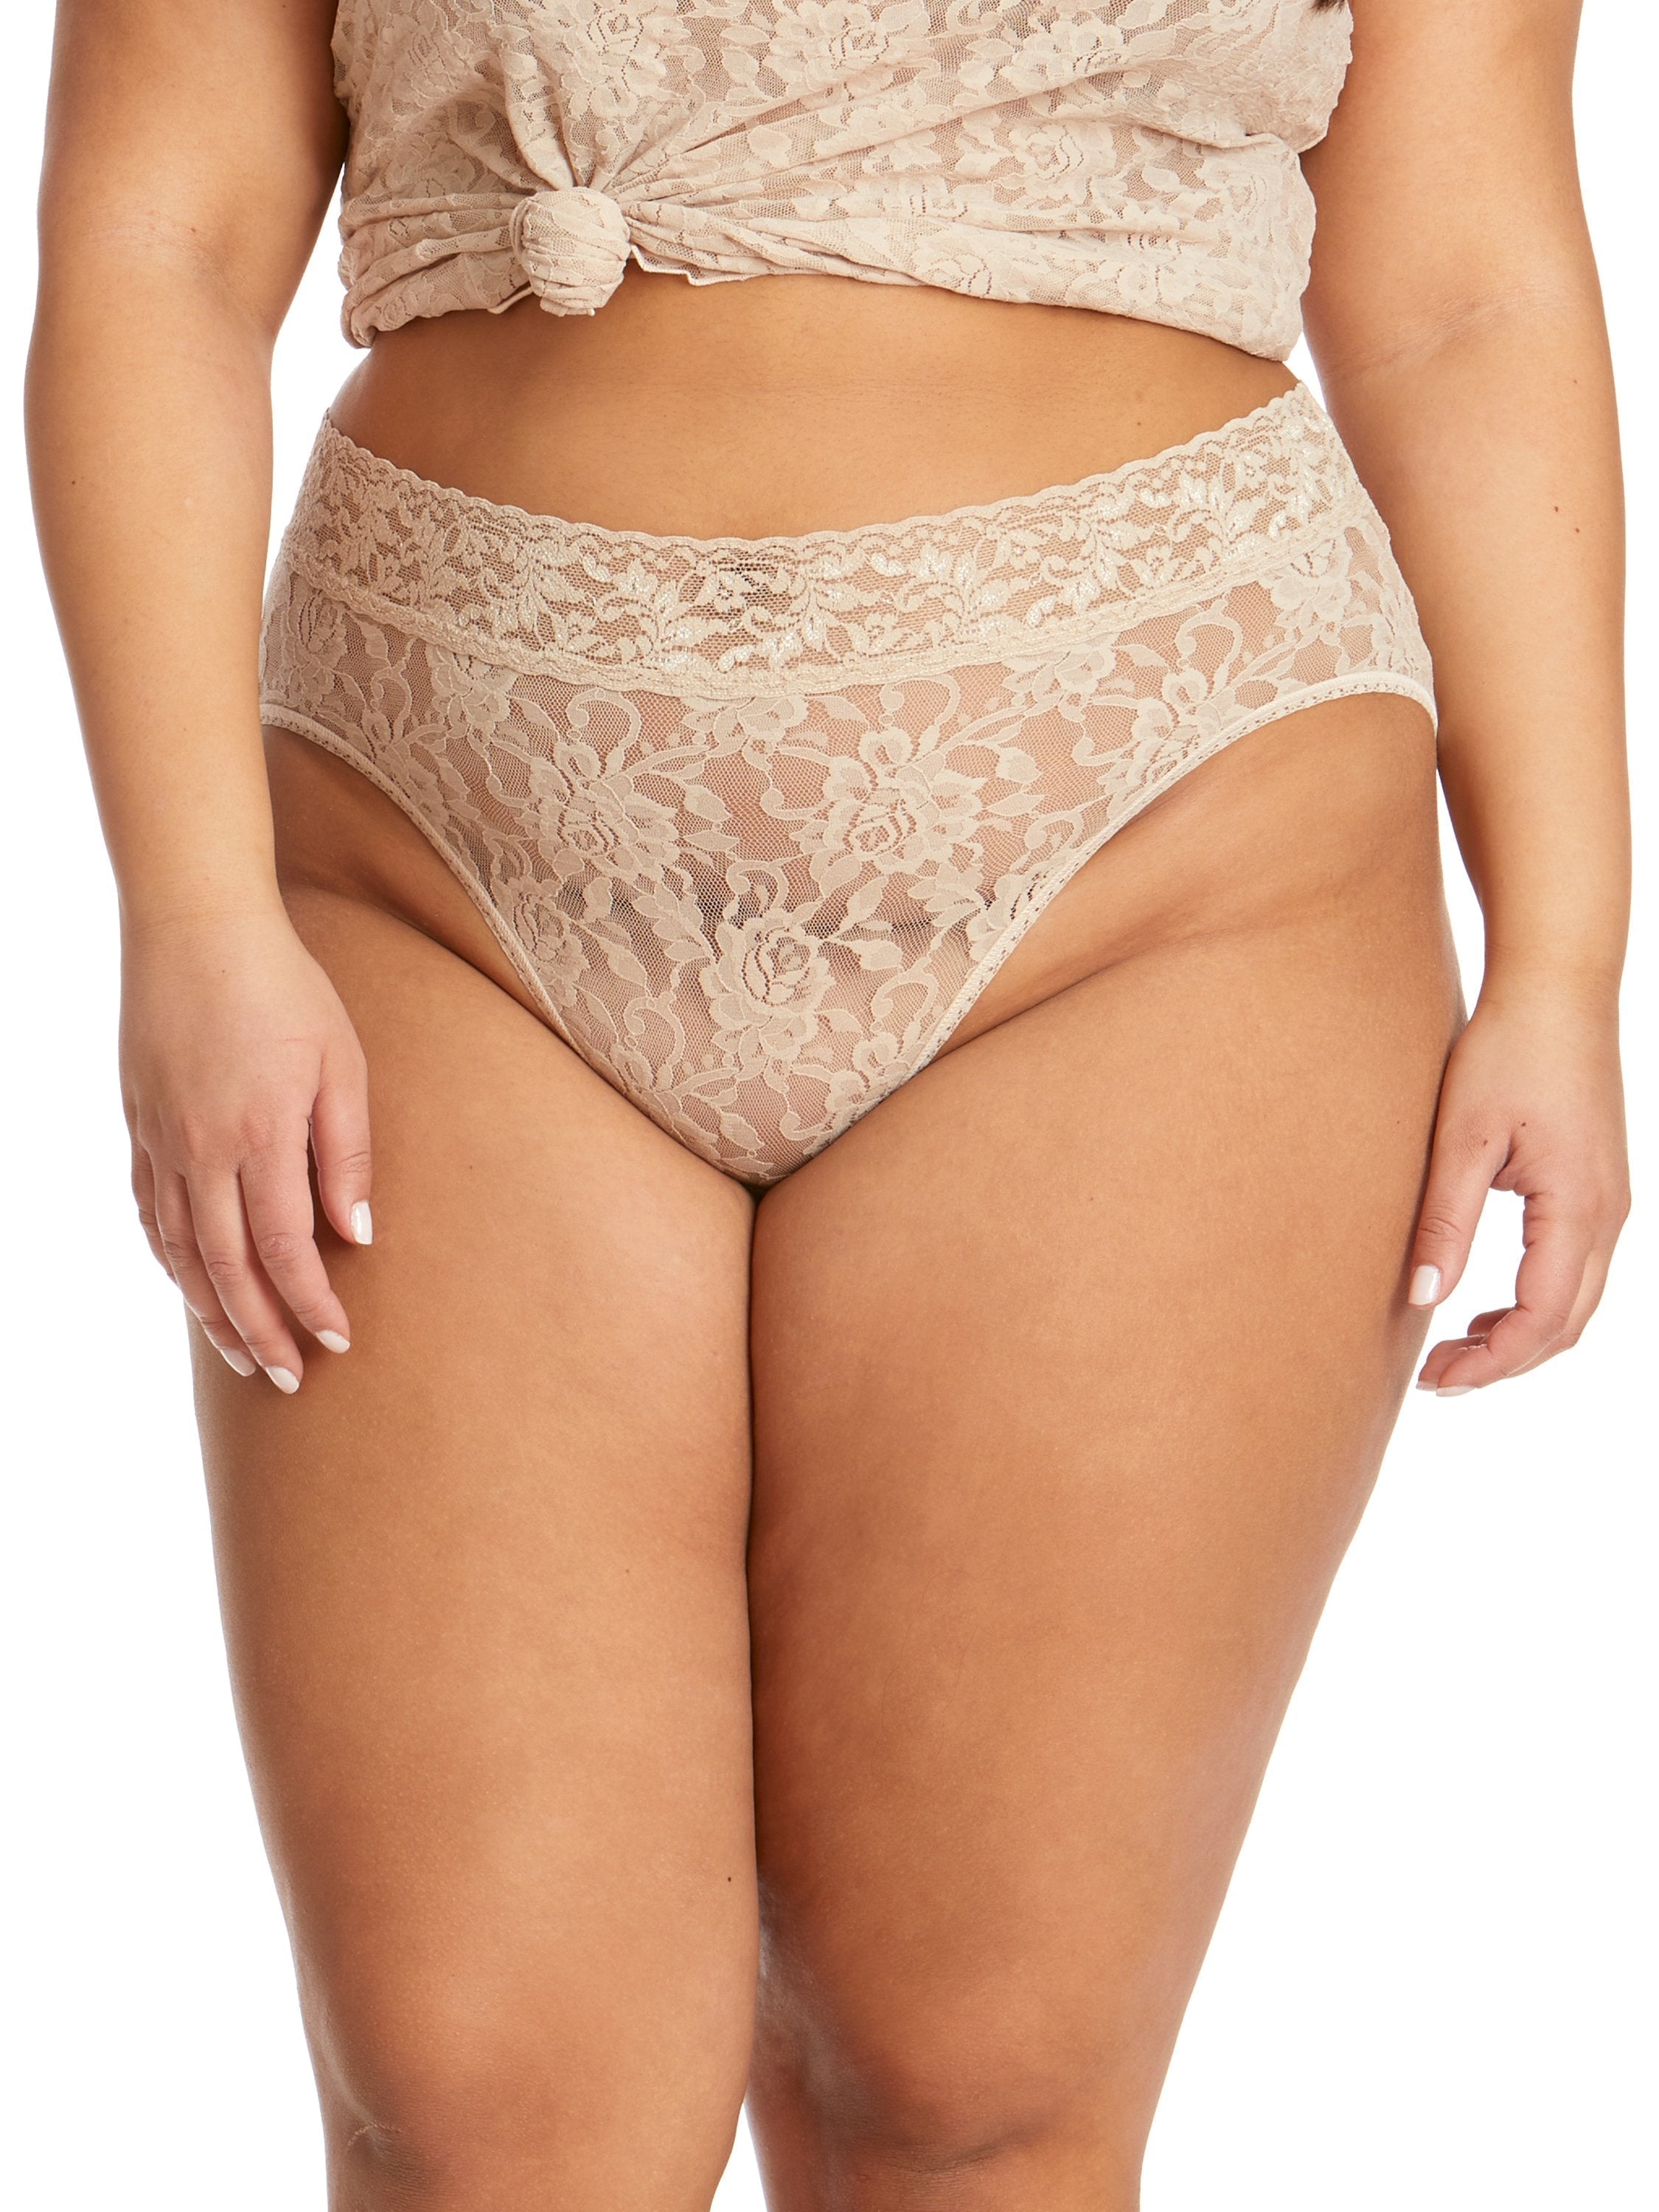 Comfy High Waisted Lace Panties for Plus Size Women Seamless and